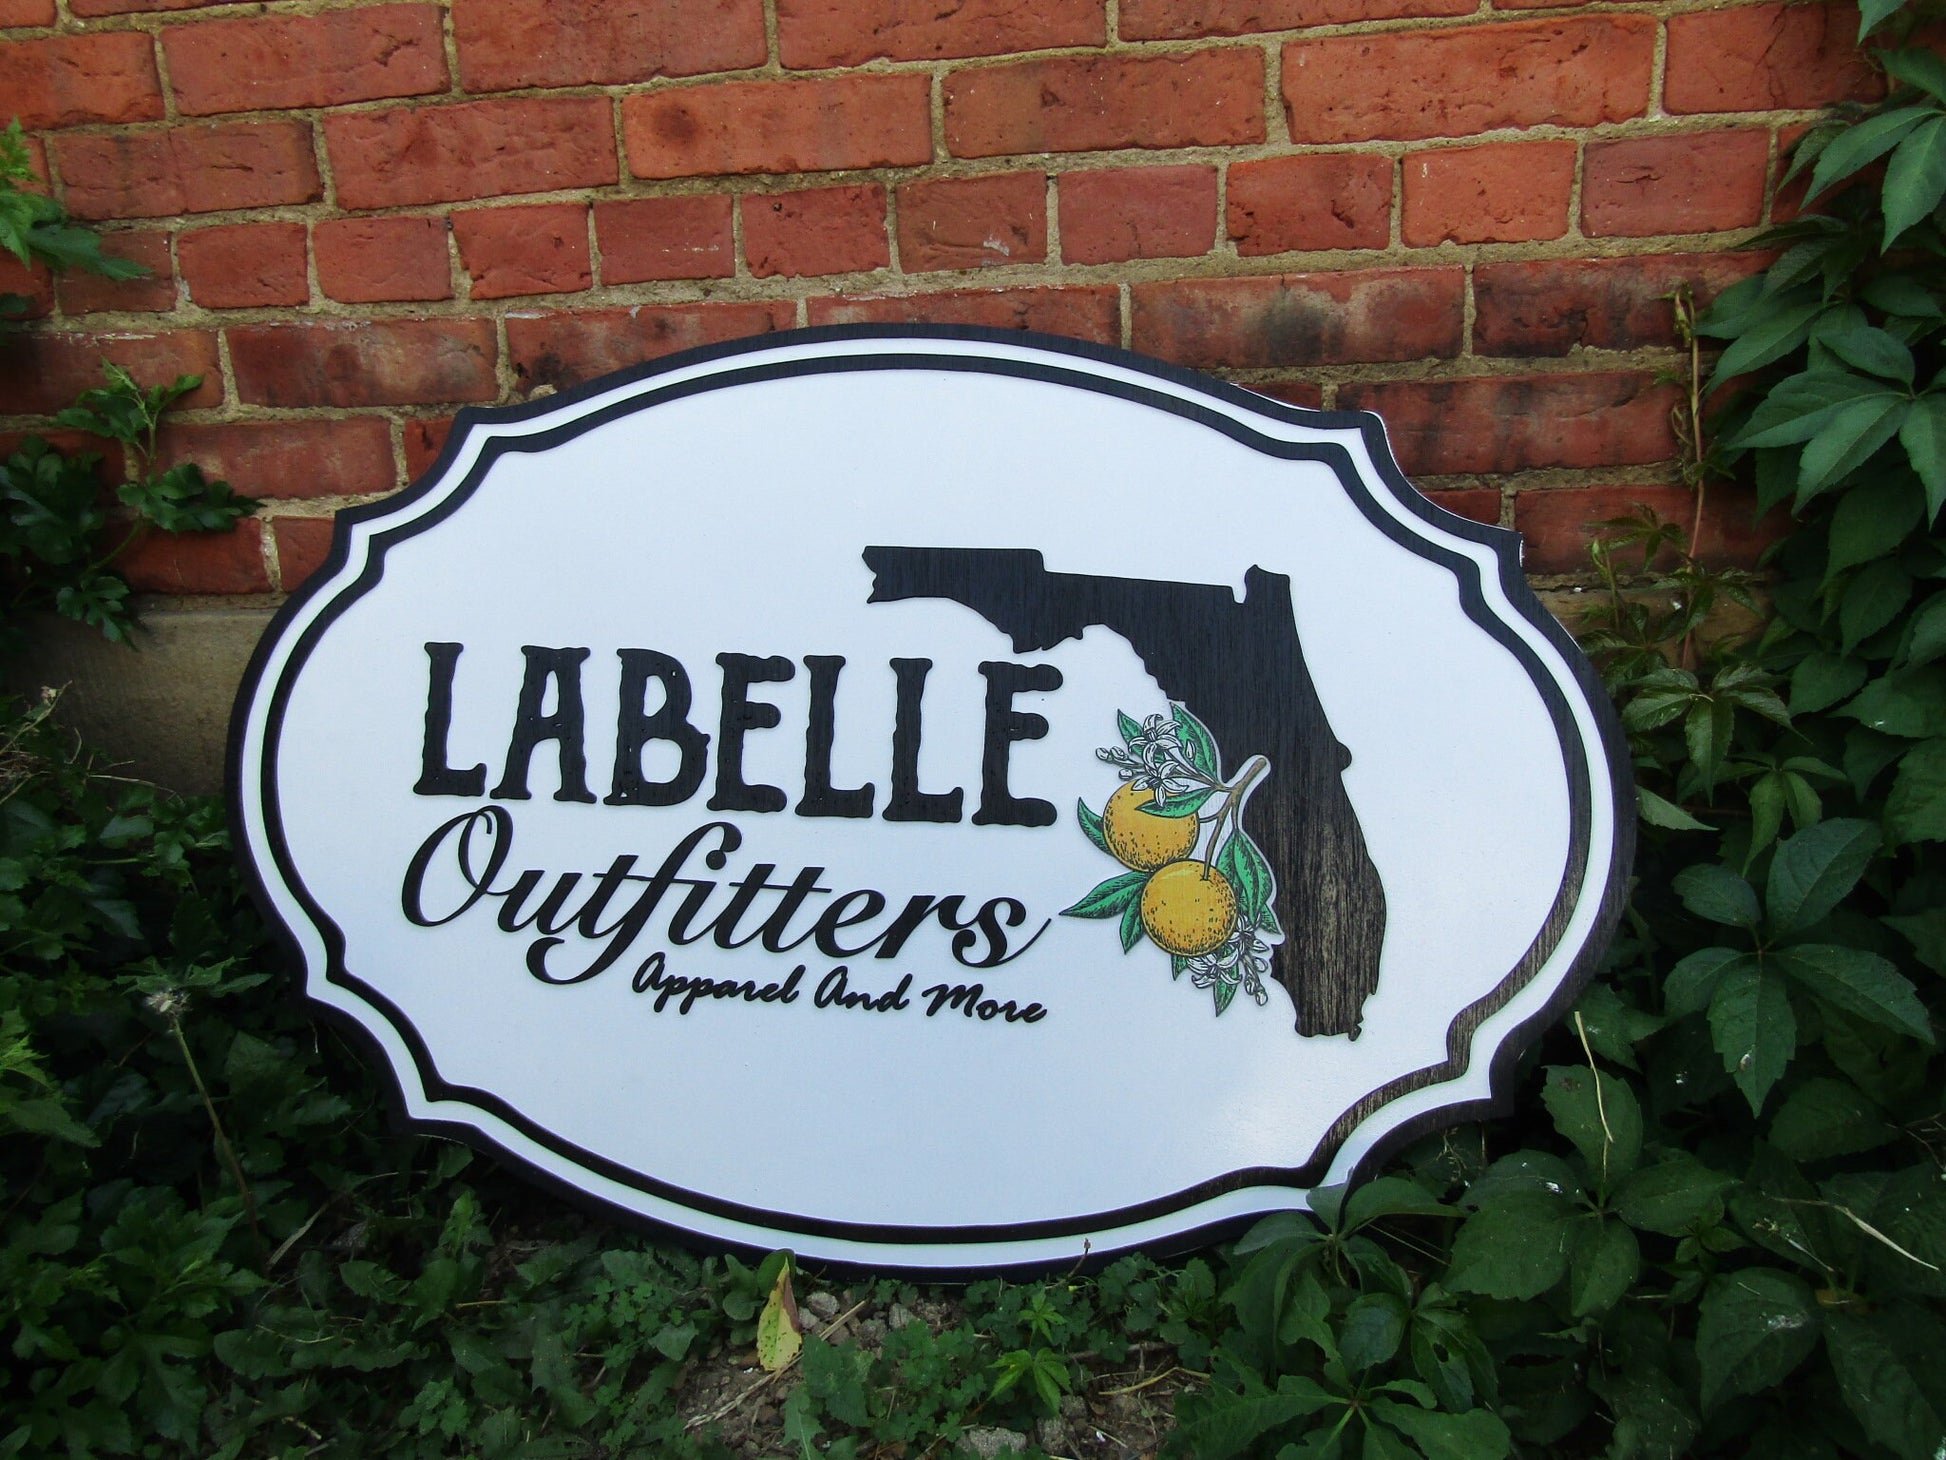 Custom Oval Business Sign Florida Labelle Outfitters Oranges Handmade Wooden Commerical Signage 3d Raised Text Image Your Logo Store Front